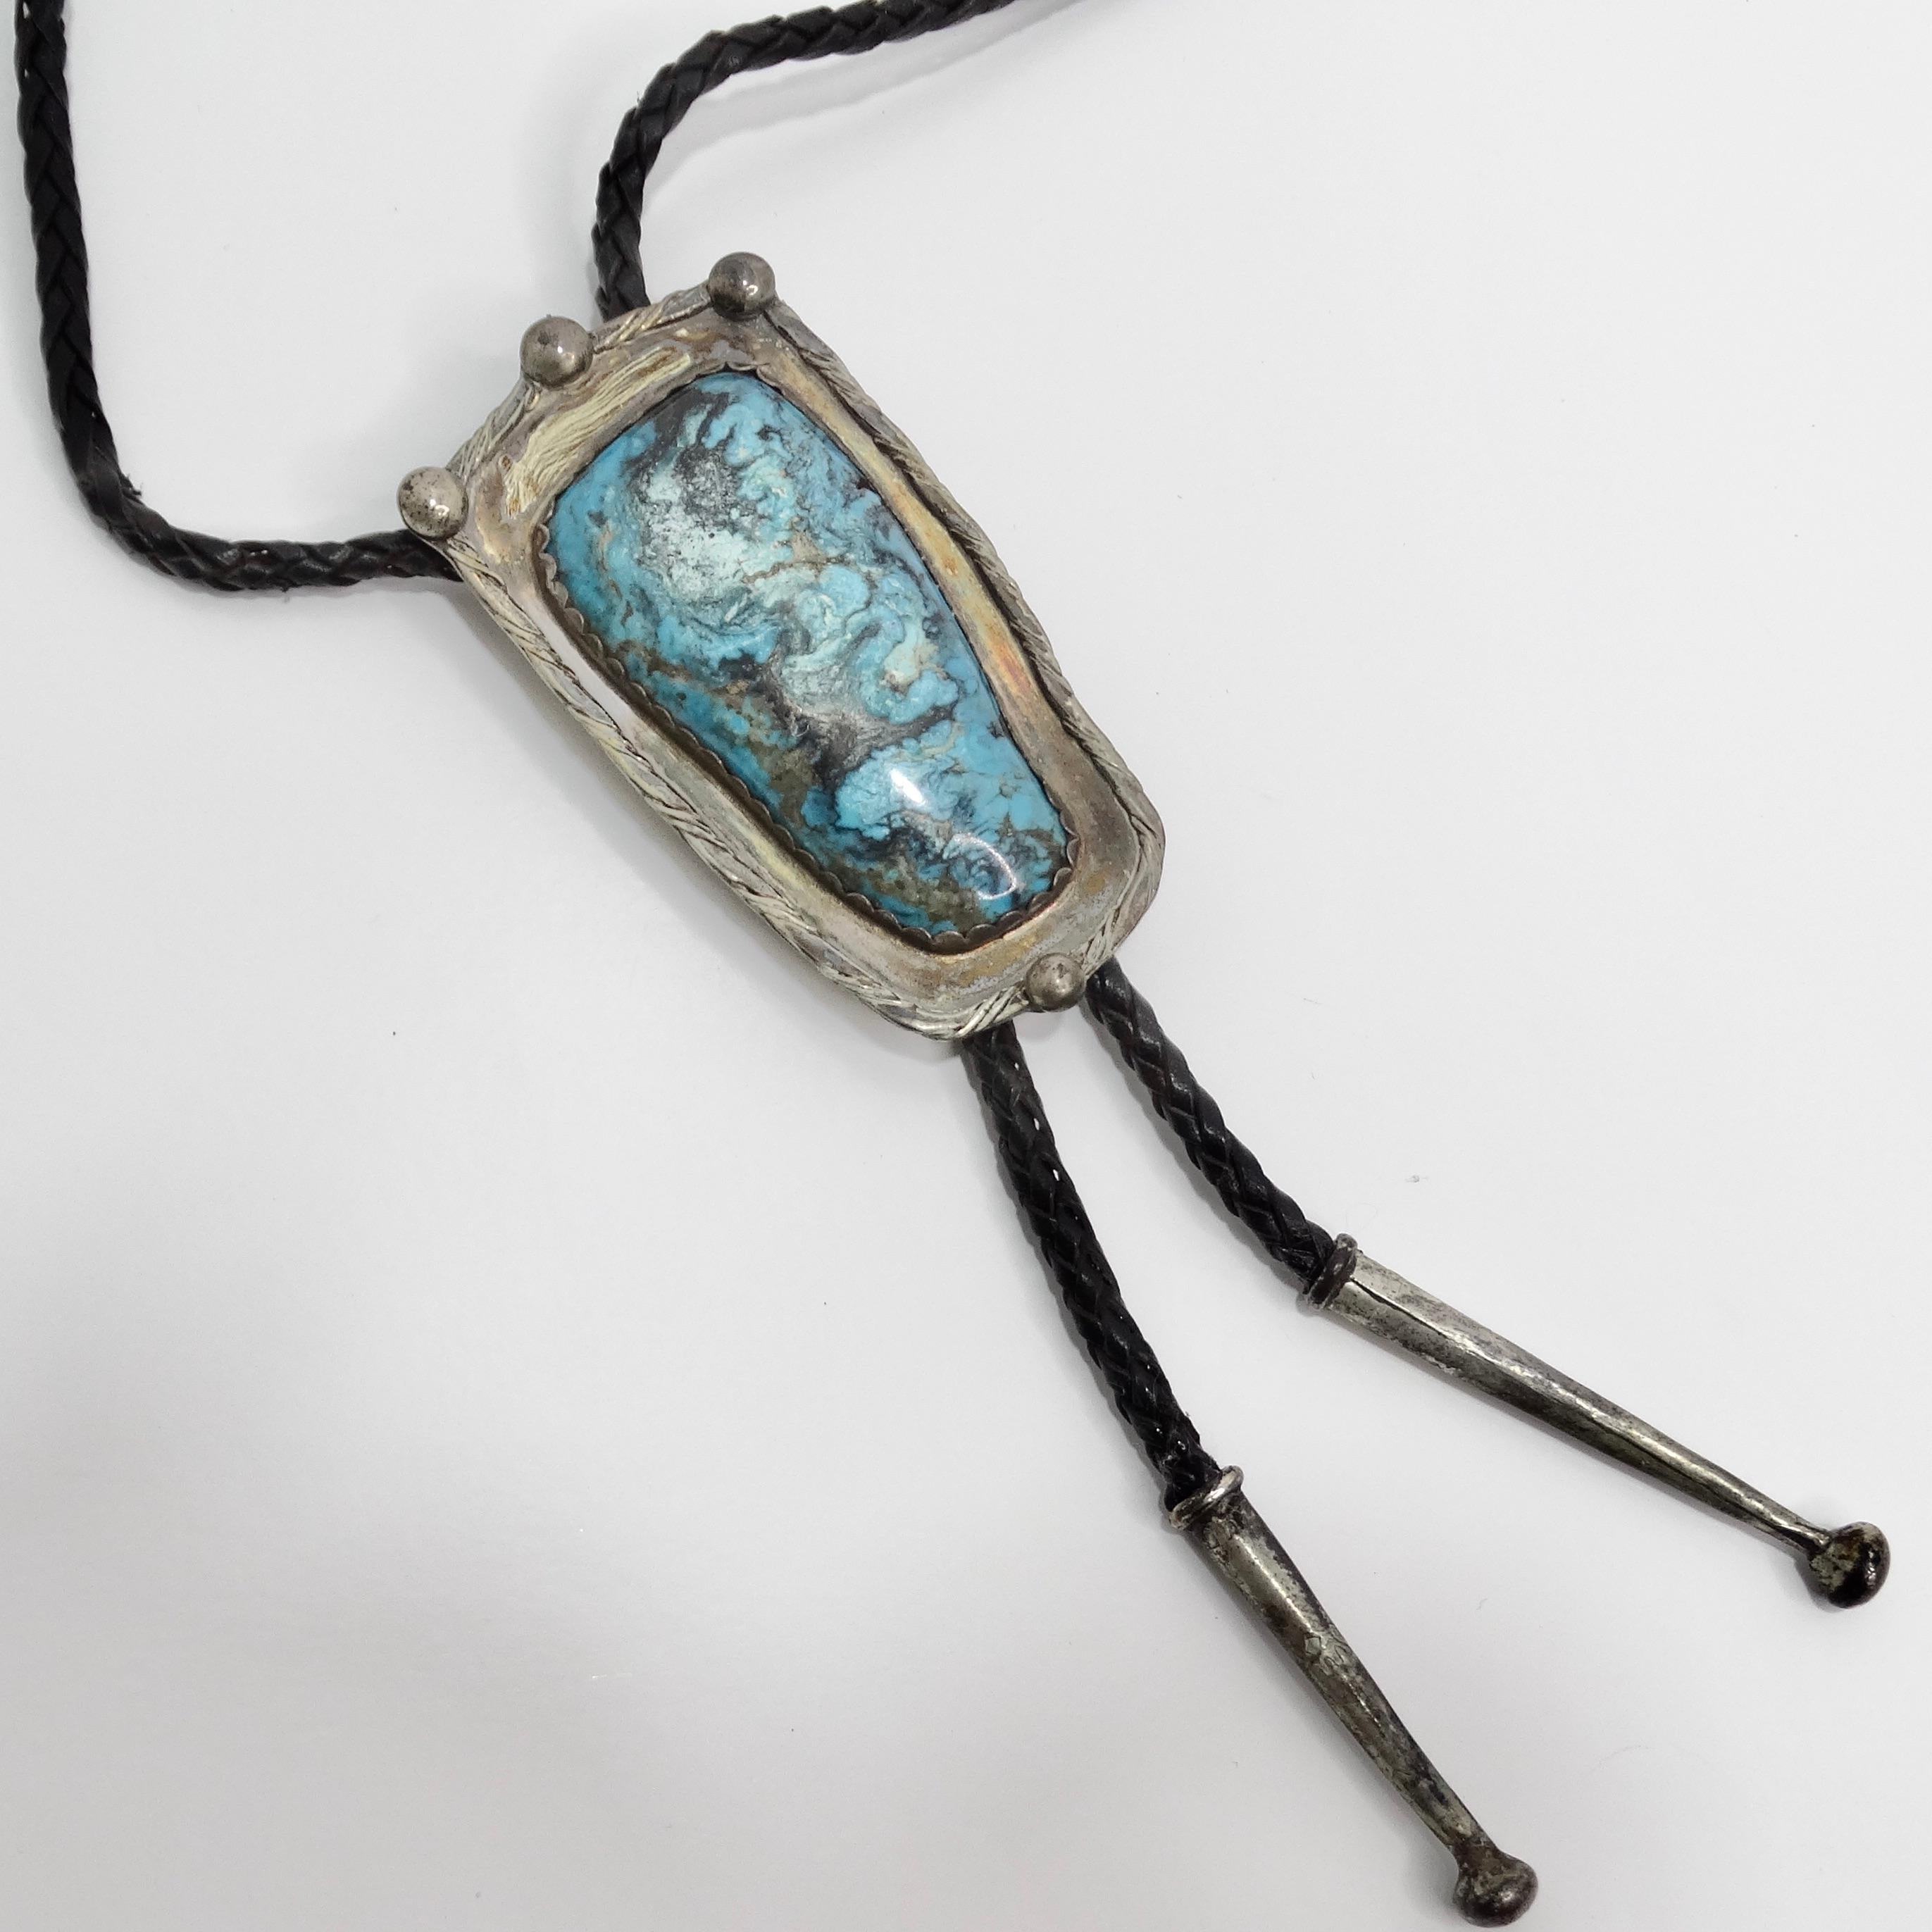 Introducing the 1960s Native American Silver Turquoise Bolo Necklace, a captivating piece that showcases the rich tradition and craftsmanship of Native American artisans. This stunning bolo-style necklace features a beautifully vibrant rectangular